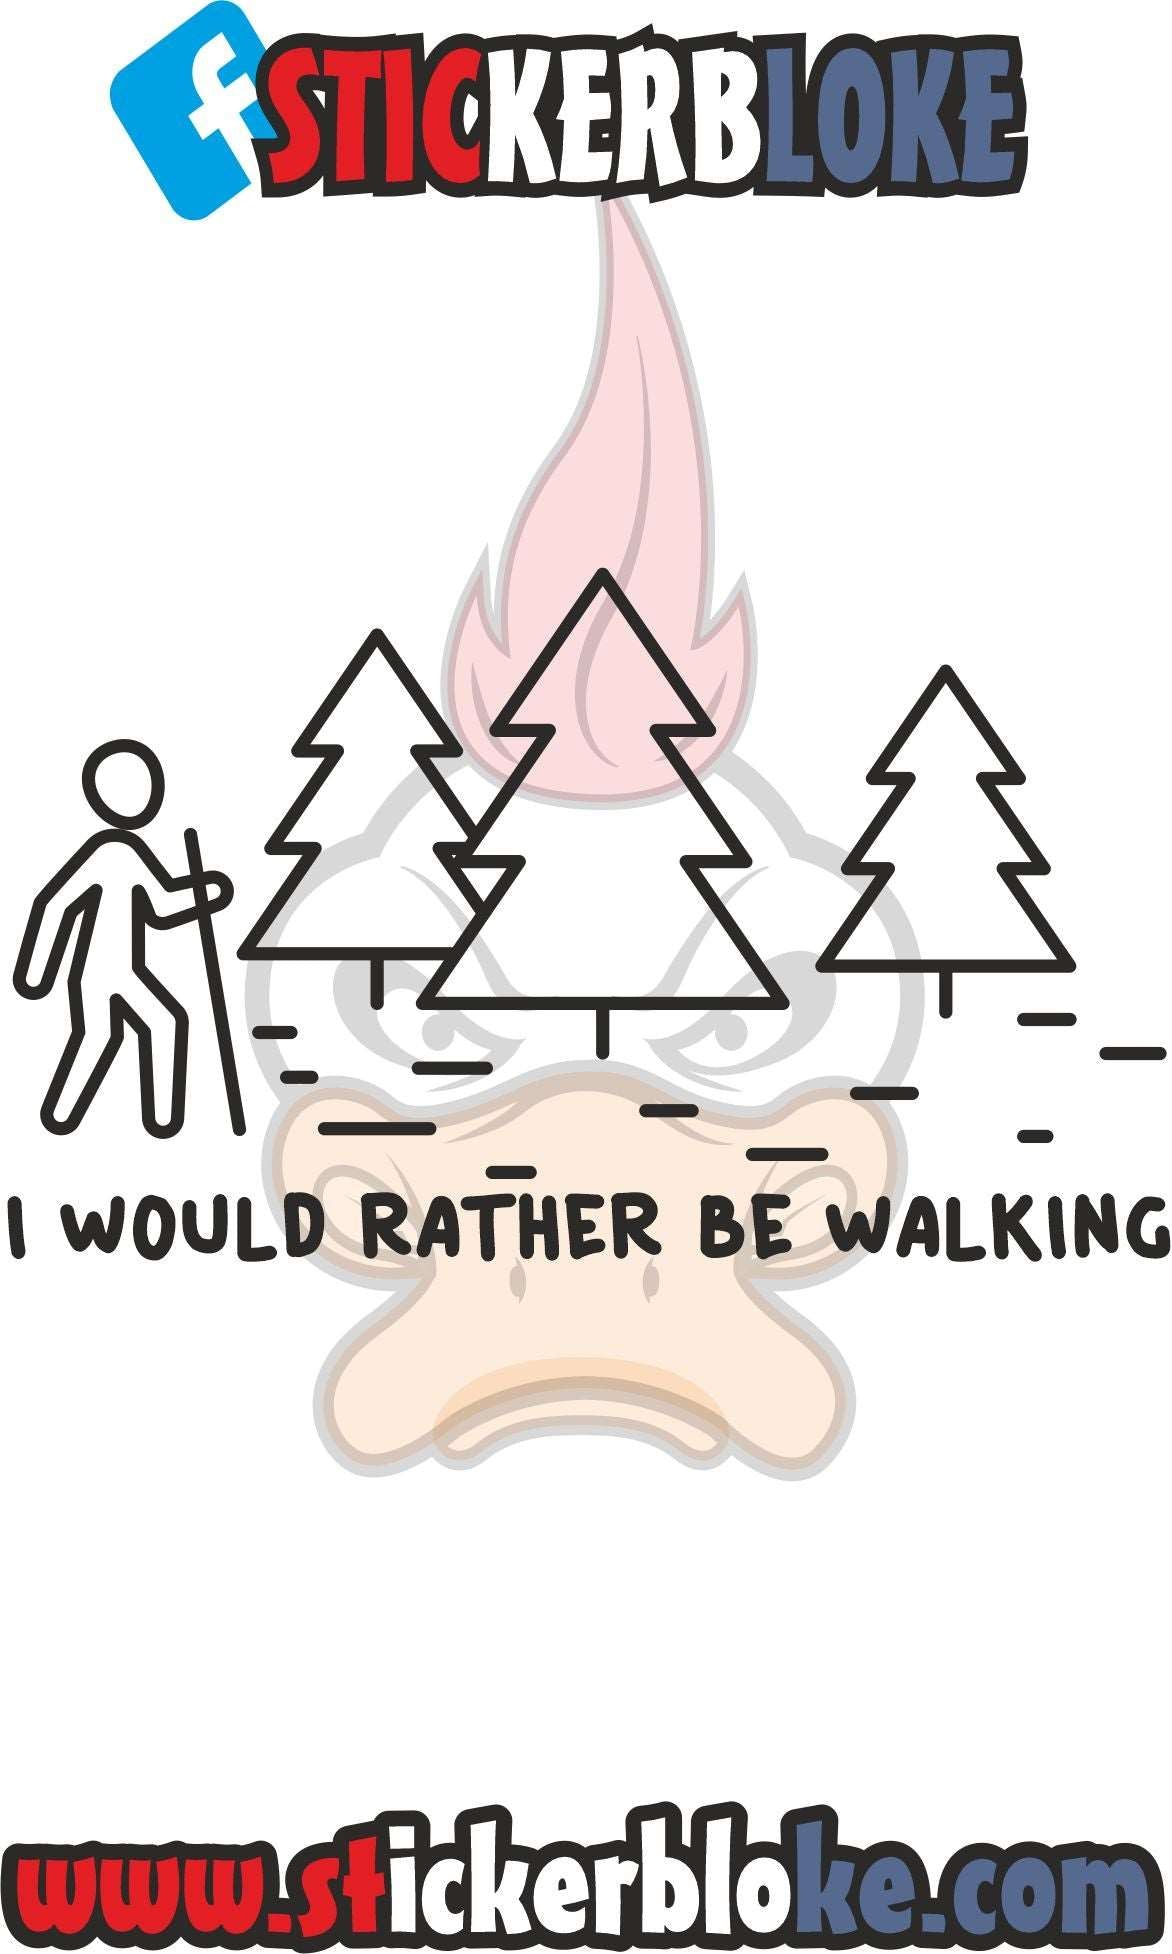 I WOULD RATHER BE WALKING STICKER